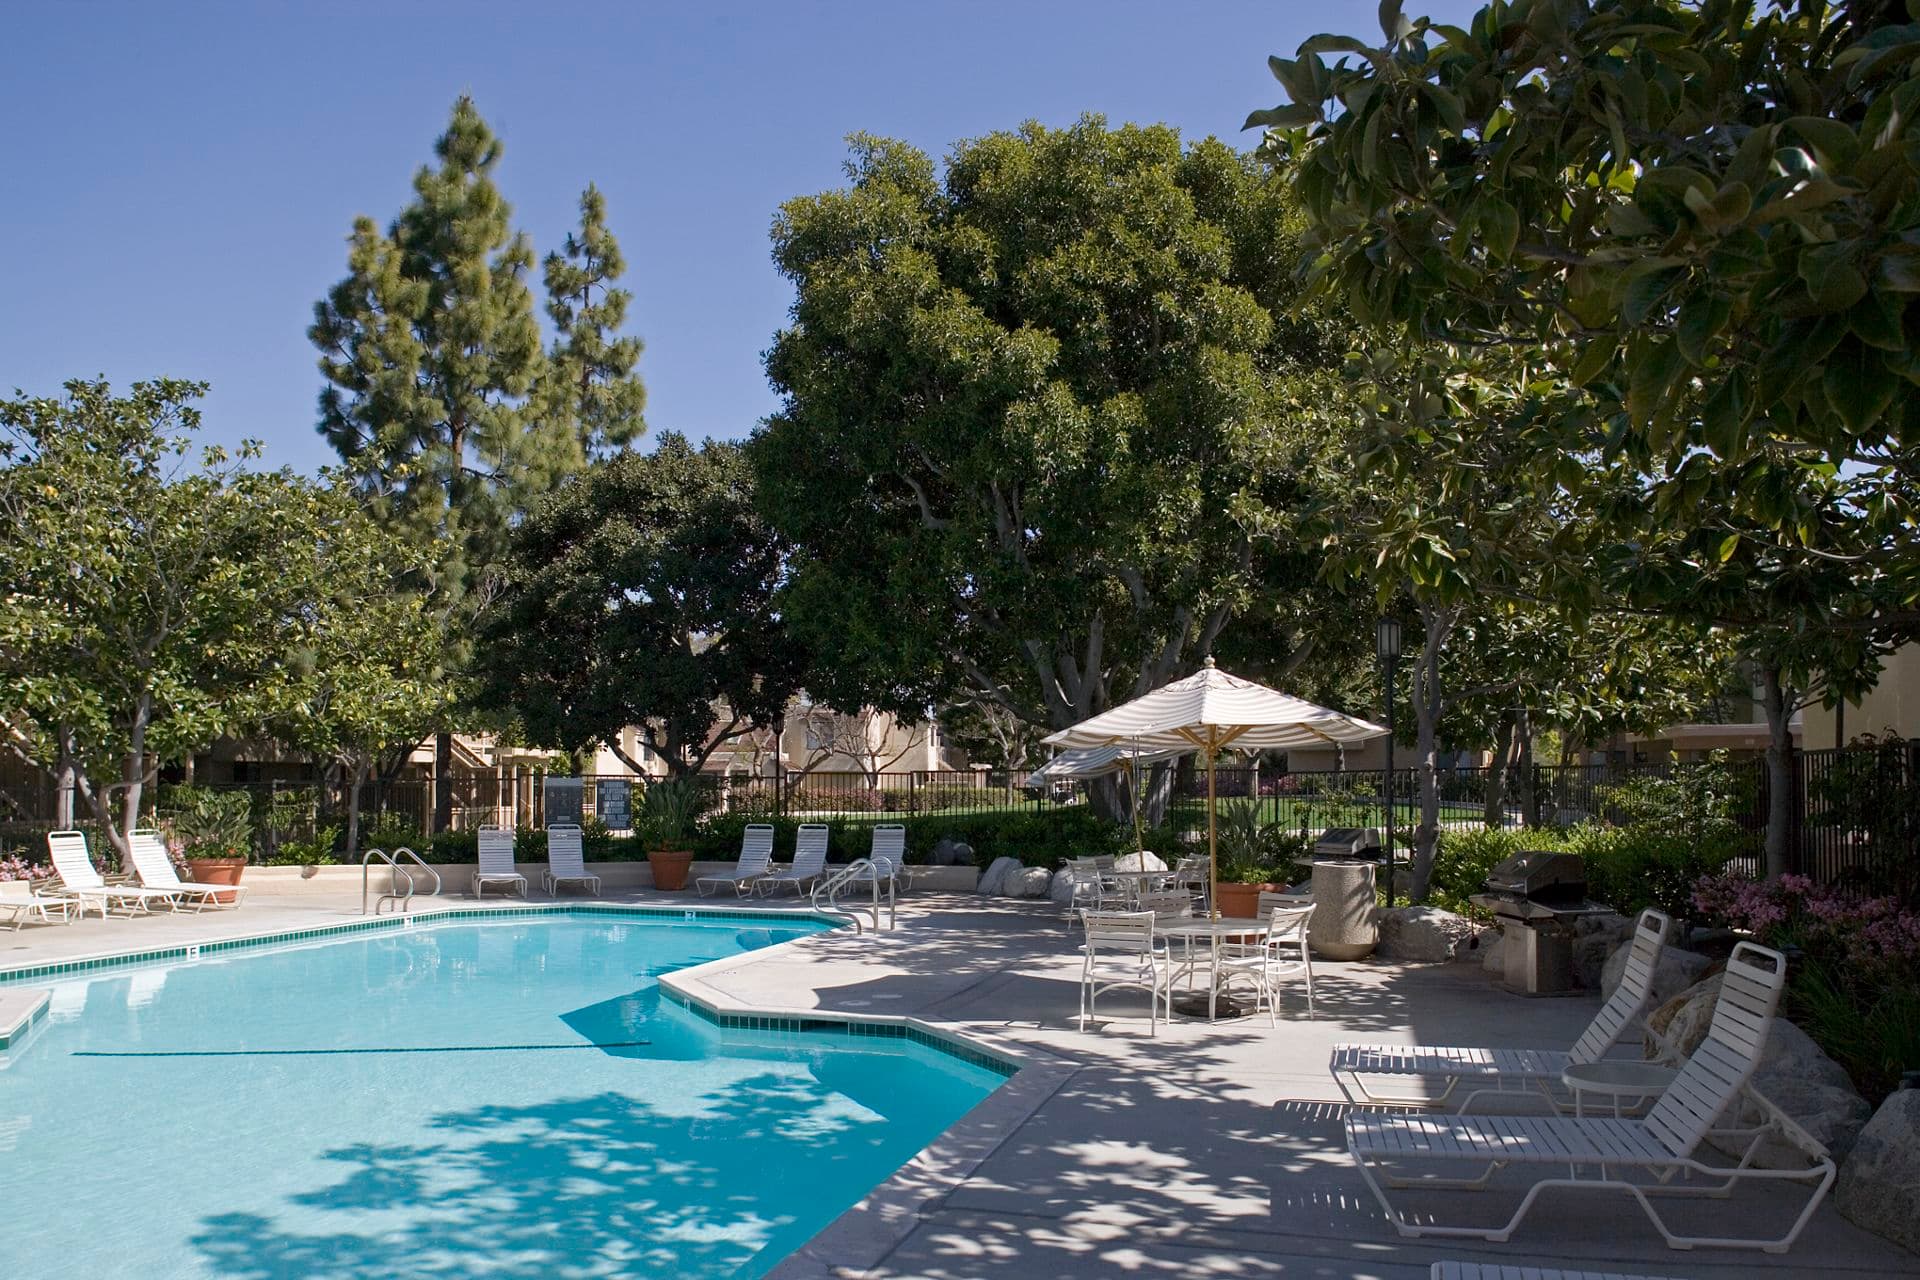 Exterior view of pool at Parkwood Apartment Homes in Irvine, CA.